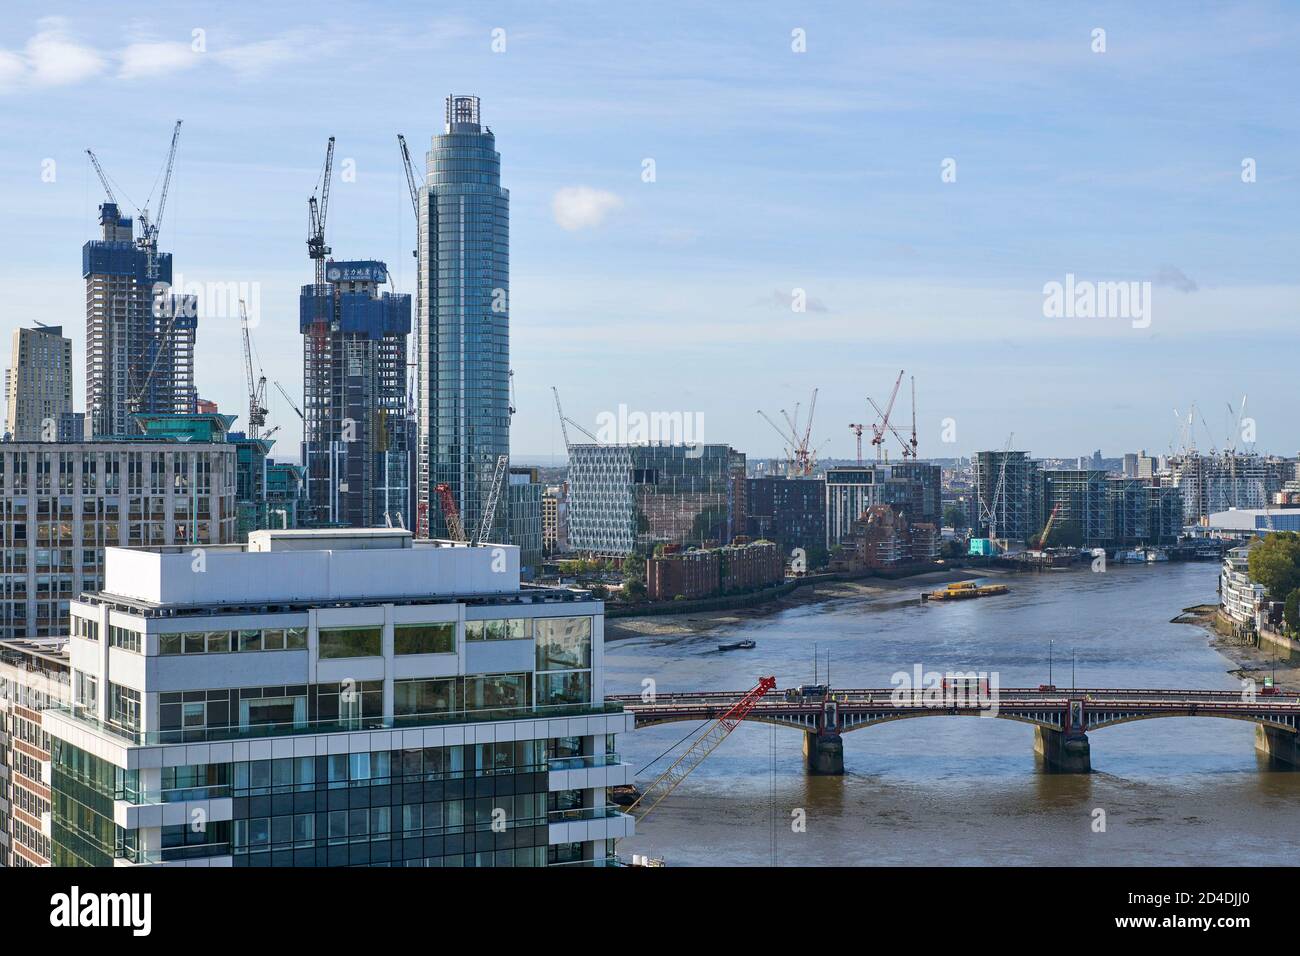 Looking west up the river Thames London, over Vauxhall bridge, towards Battersea power station, with residential development adjacent to the river Stock Photo